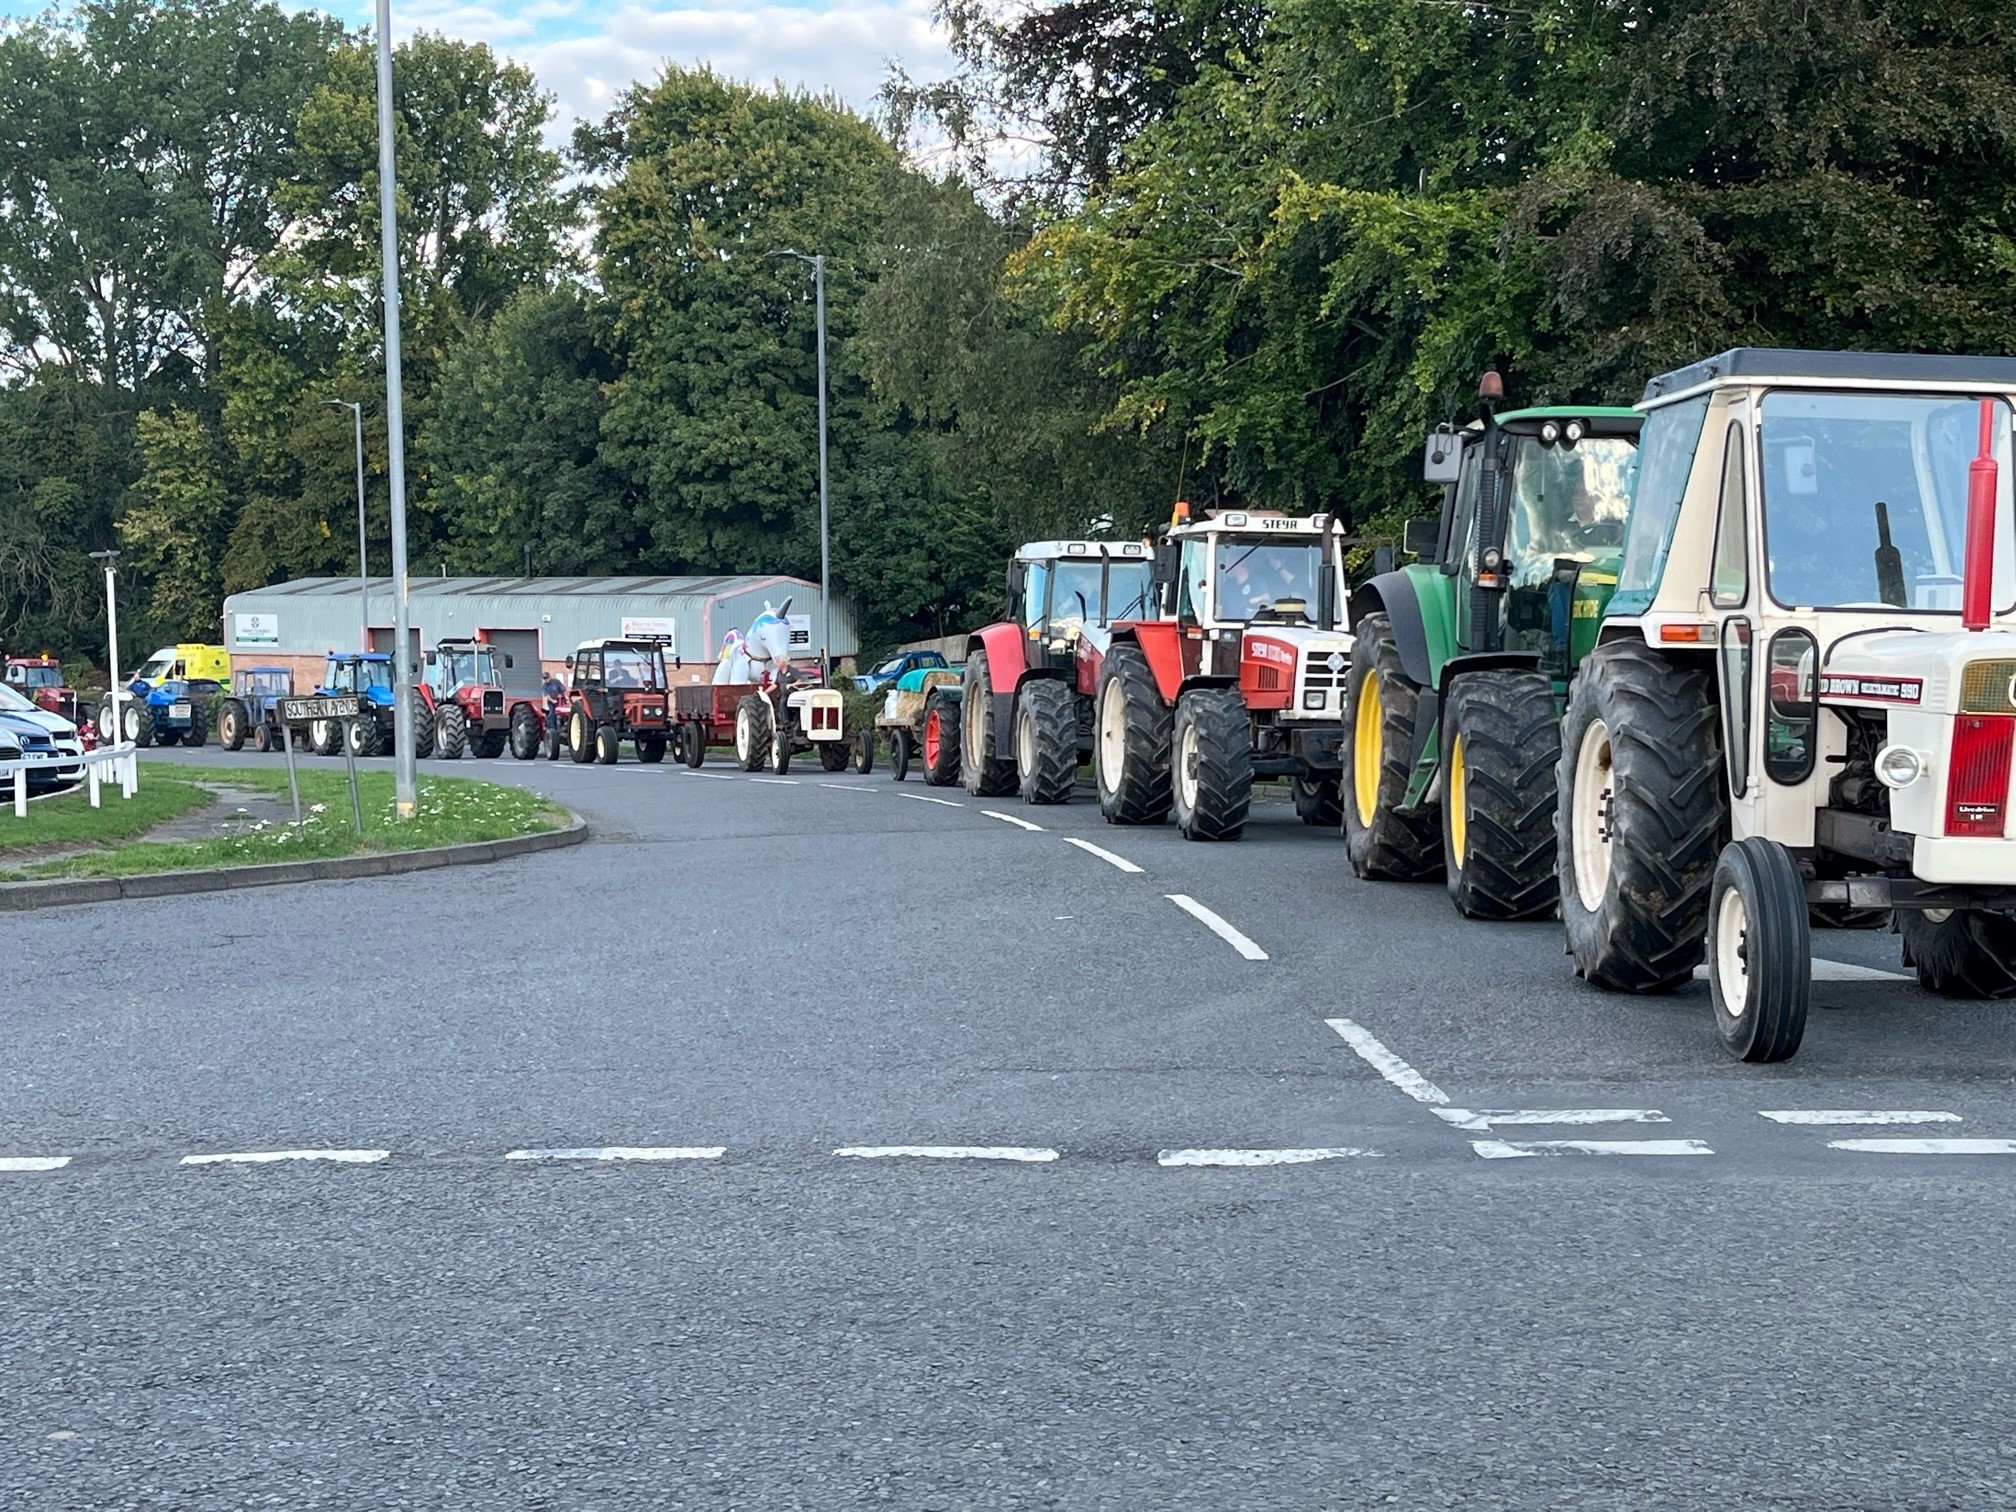 A parade of tractors take to the roads.